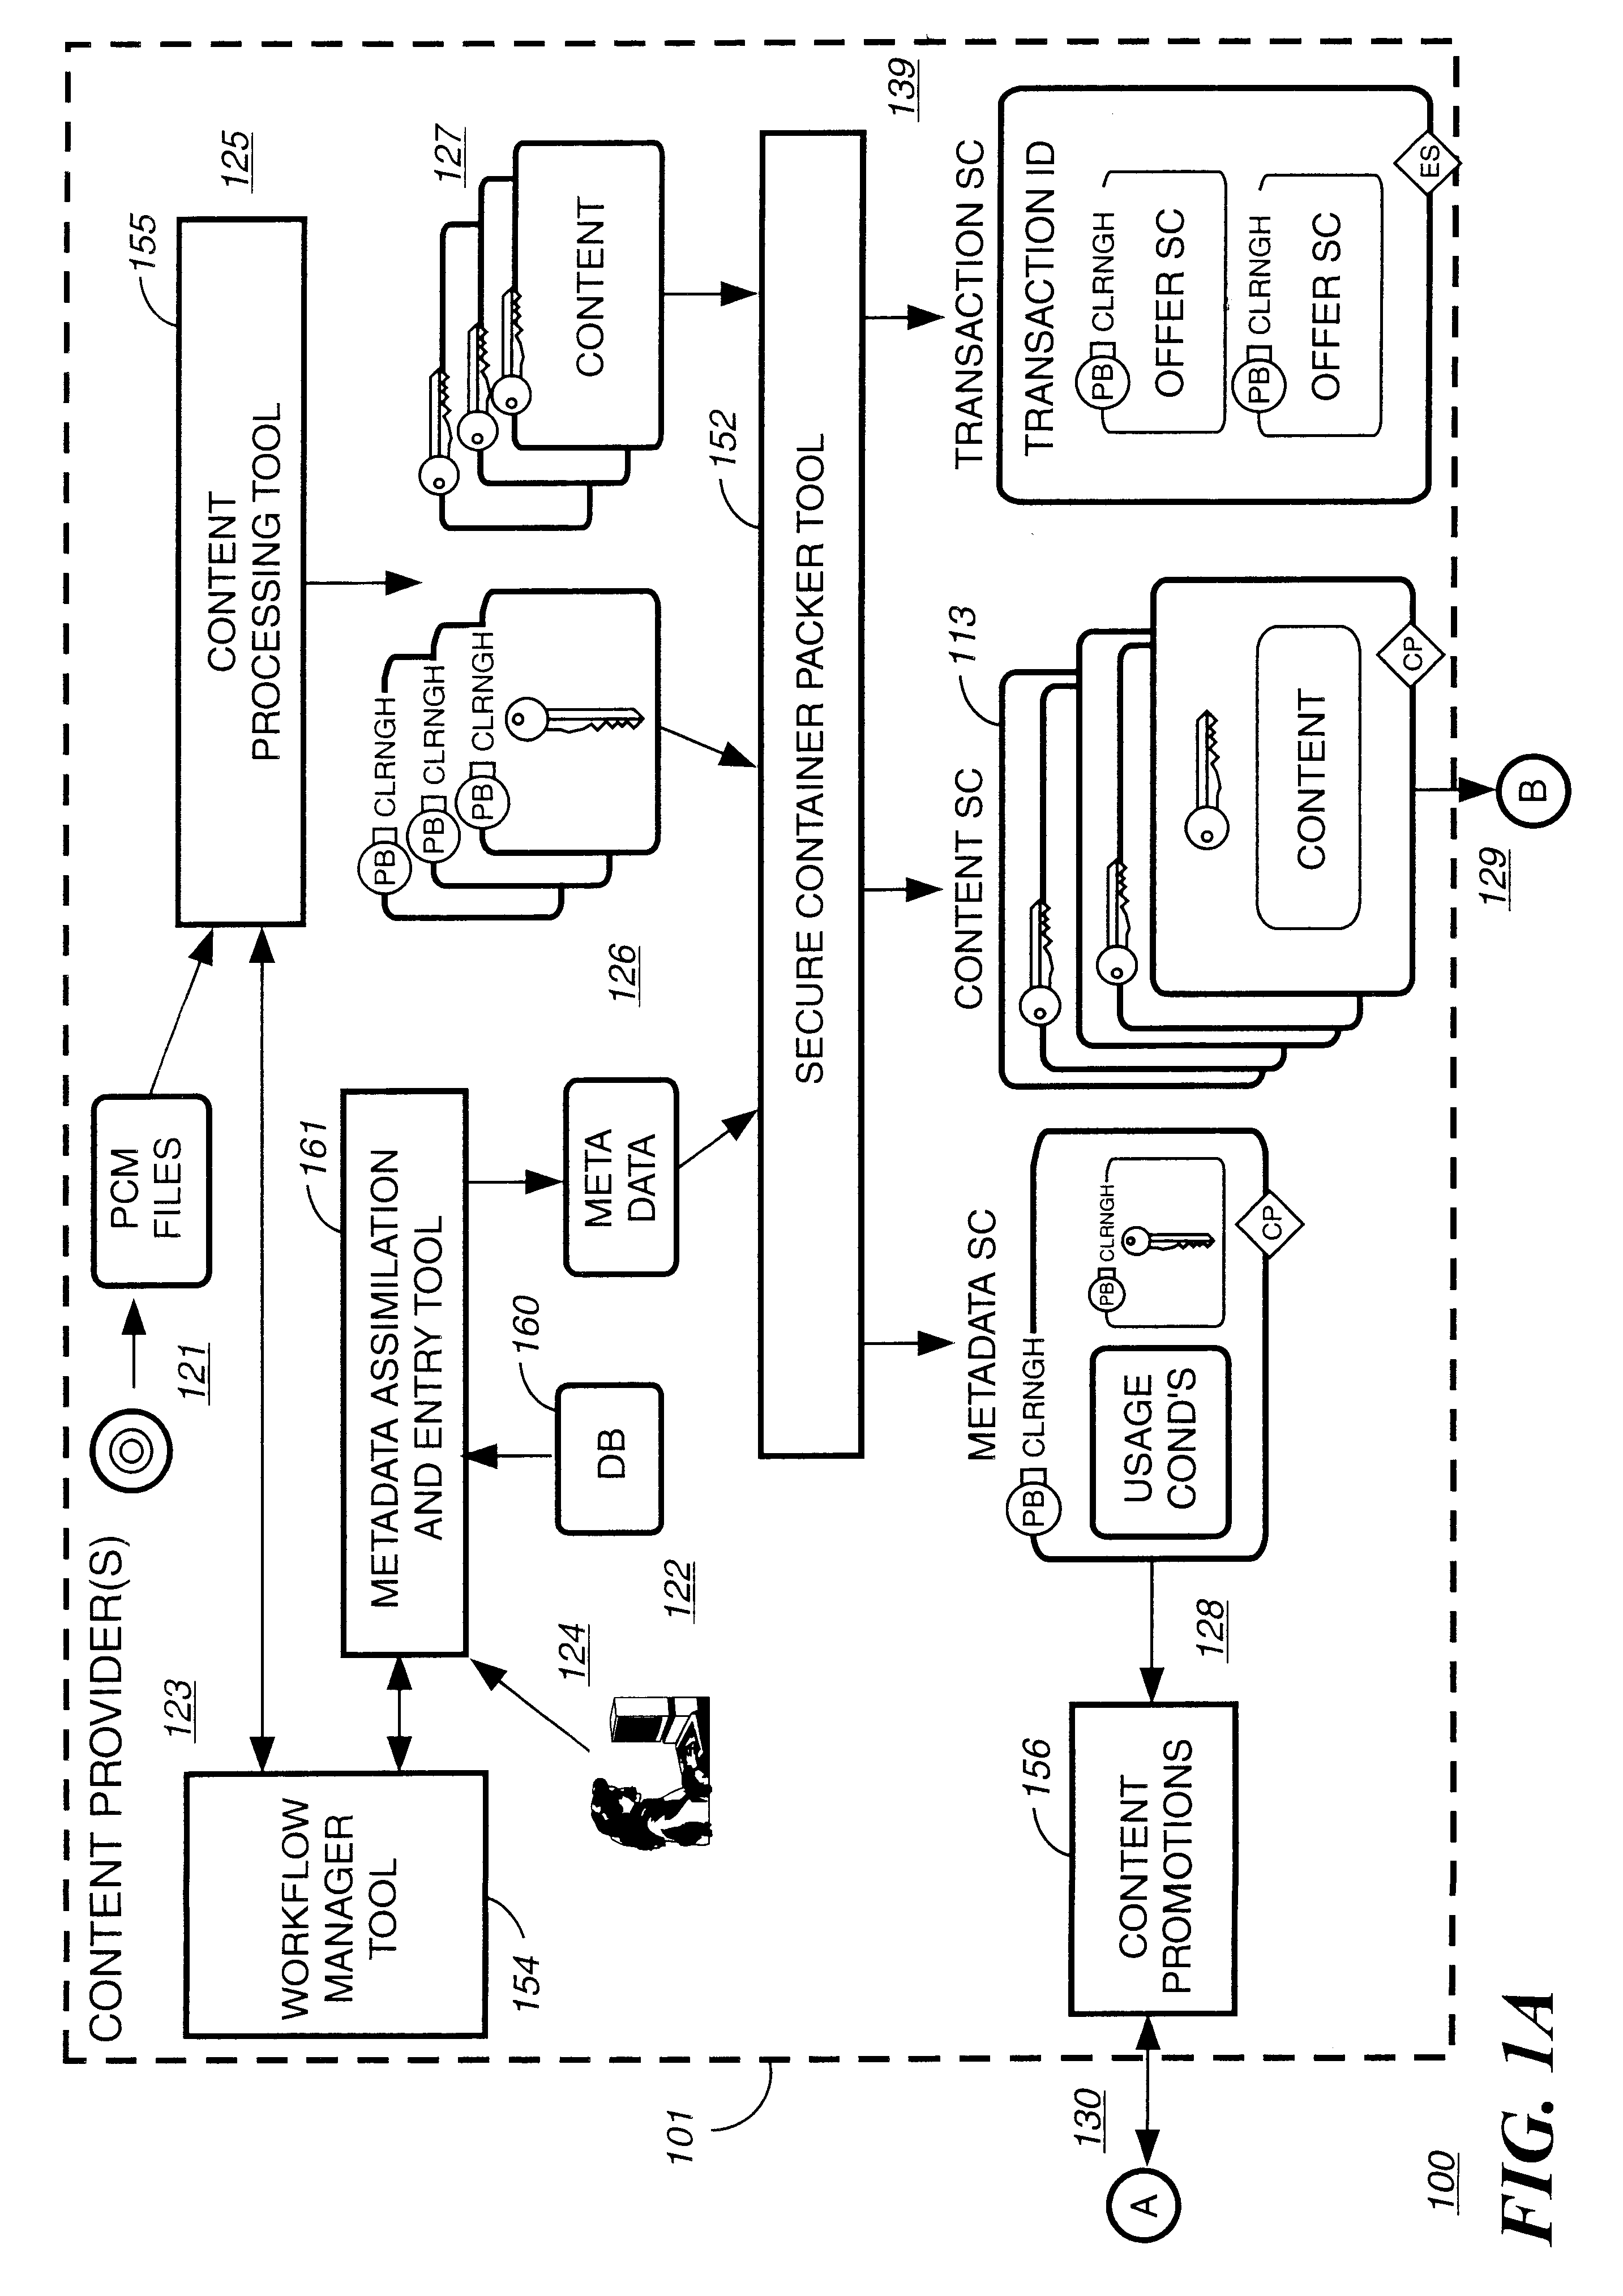 Electronic content delivery system